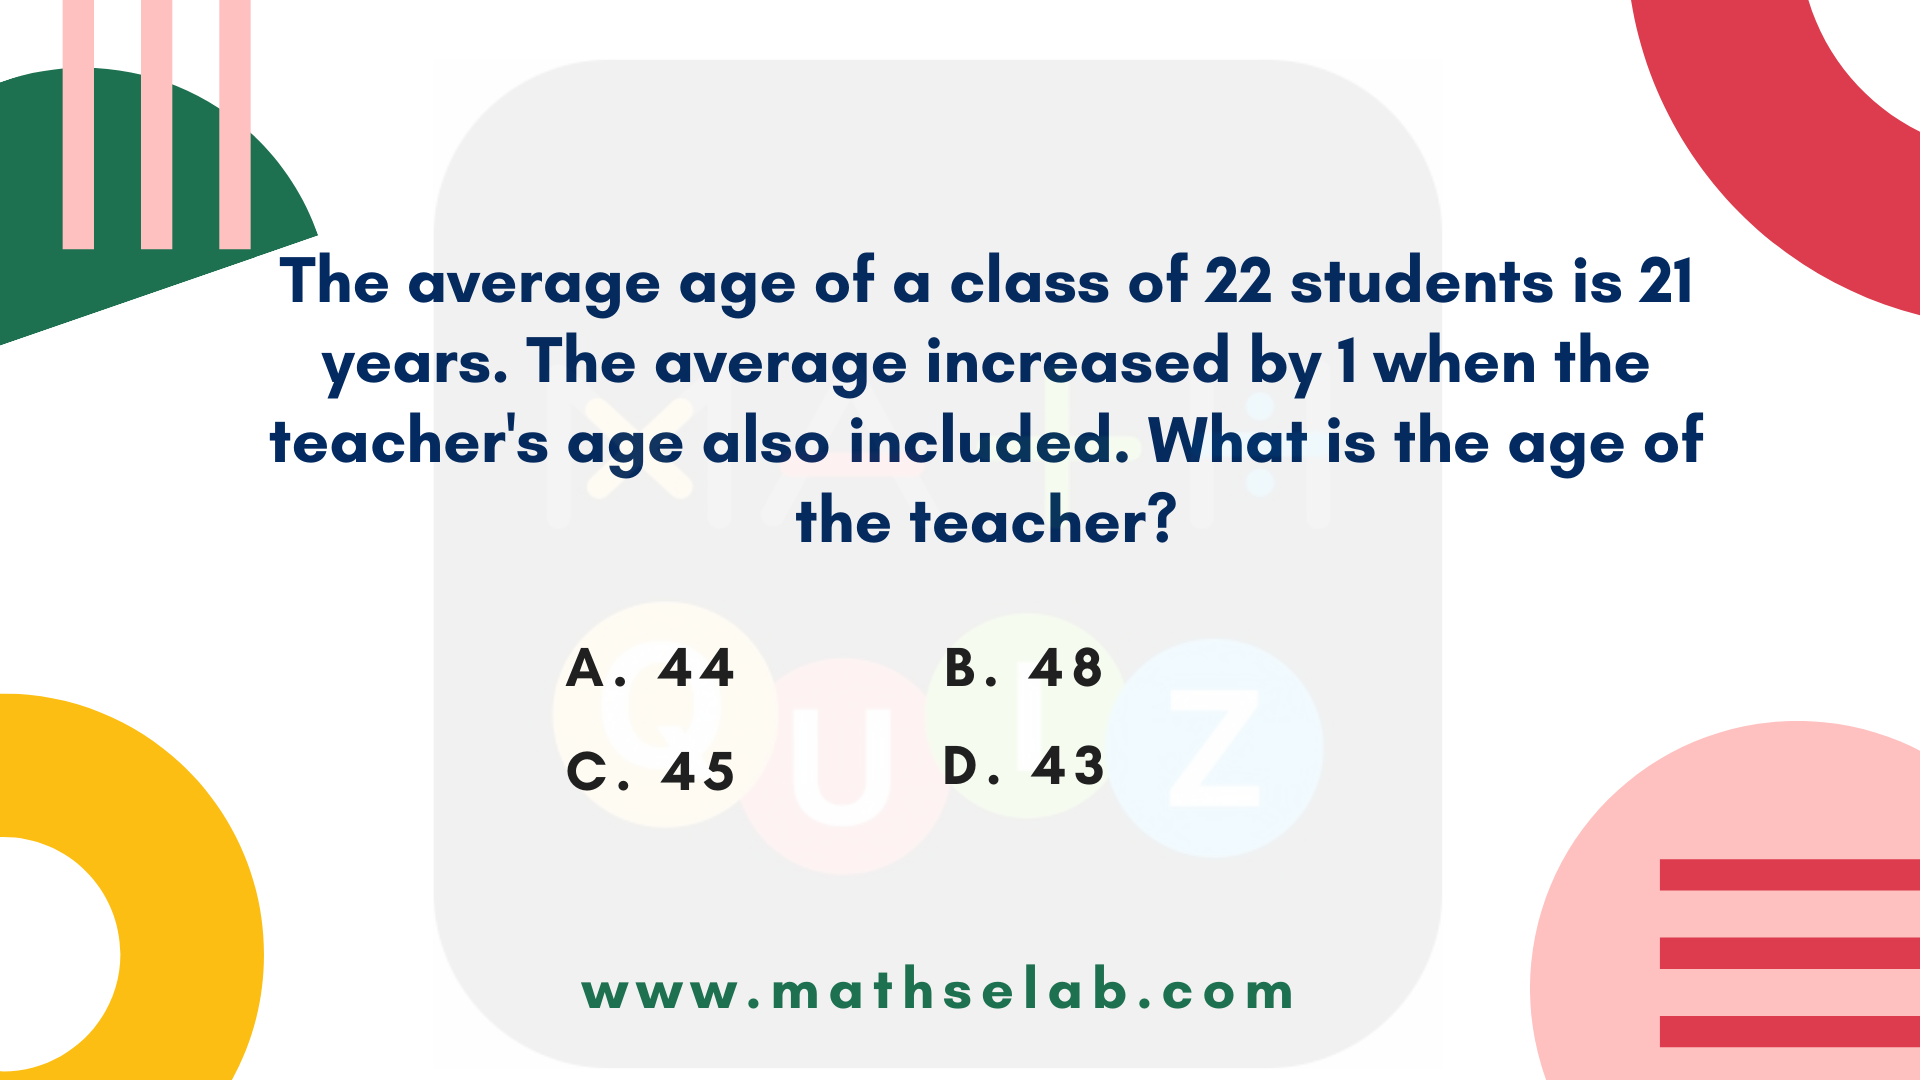 The average age of a class of  22  students is  21  years. The average increased by  1  when the teacher's age also included. What is the age of the teacher?